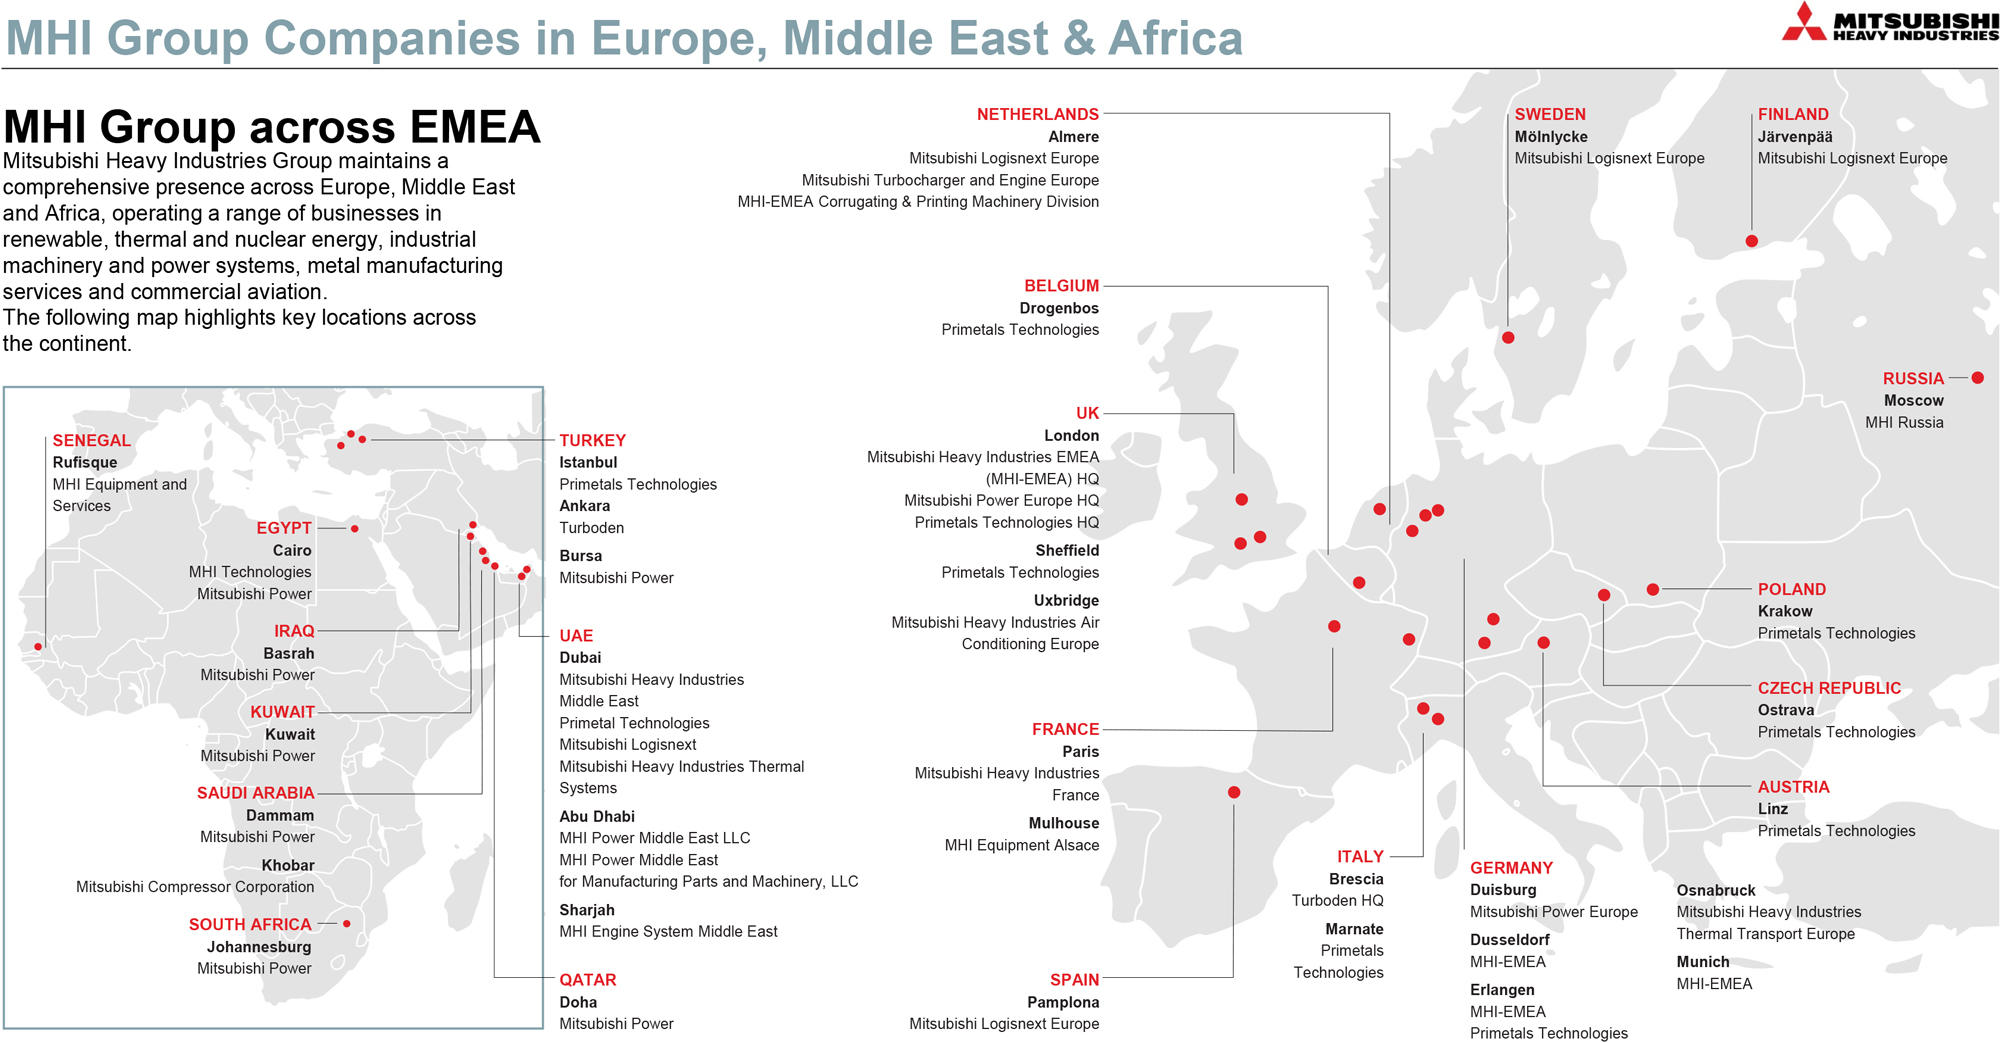 MHI Group Companies in Europe, Middle East & Africa